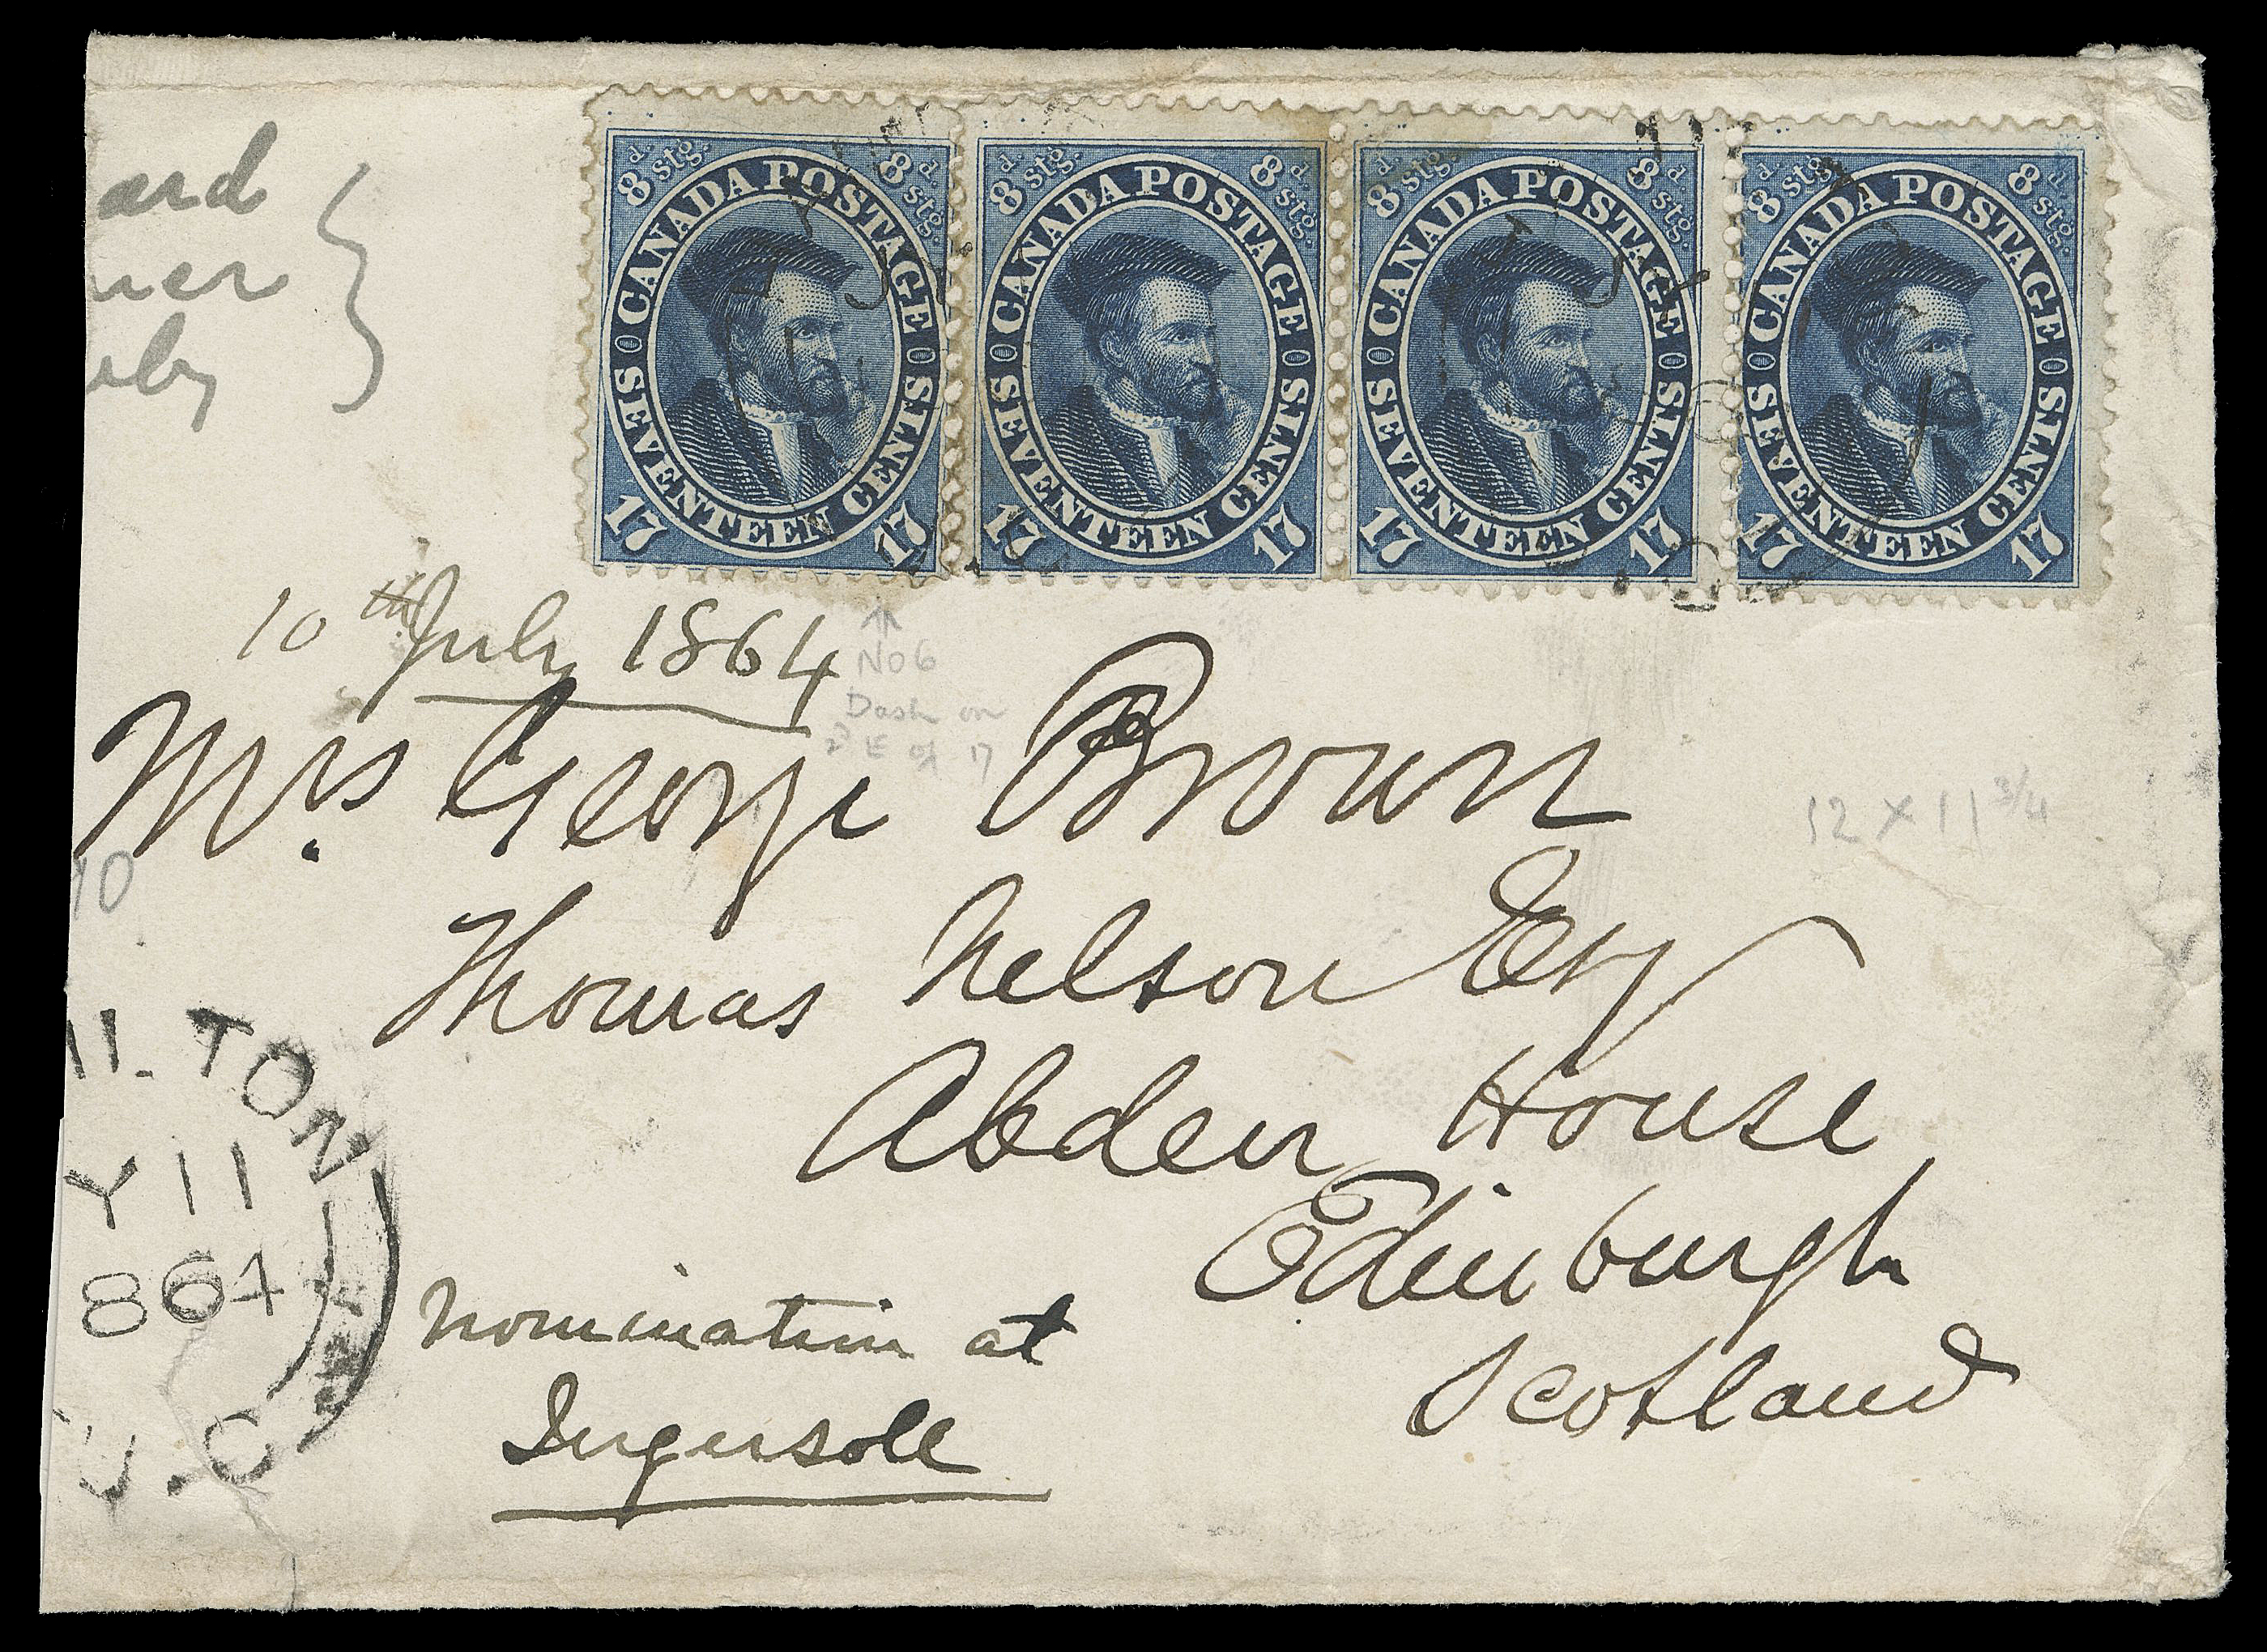 TEN PENCE AND SEVENTEEN CENTS  1864 (July 11) Large part cover from Hamilton to Mrs. George Brown, Edinburgh, Scotland, displaying an impressive franking of strip of three and single 17c blue, perf 12x11¾, tied by light Hamilton double arc datestamps, third partial strike at left, stamps with light gum staining, small corner fault on third stamp, nevertheless a very rare quadruple Cunard Line rate cover to the UK, neat Edinburgh JY 25 64 CDS receiver on back, Fine (Unitrade 19)

Provenance: Art Leggett Cents Issue Exhibit Collection (private sale)

Census: According to Firby Cents Issue cover census only two covers have been reported paying the 68 cent Trans-Atlantic rate (both with four 17 cent stamps).